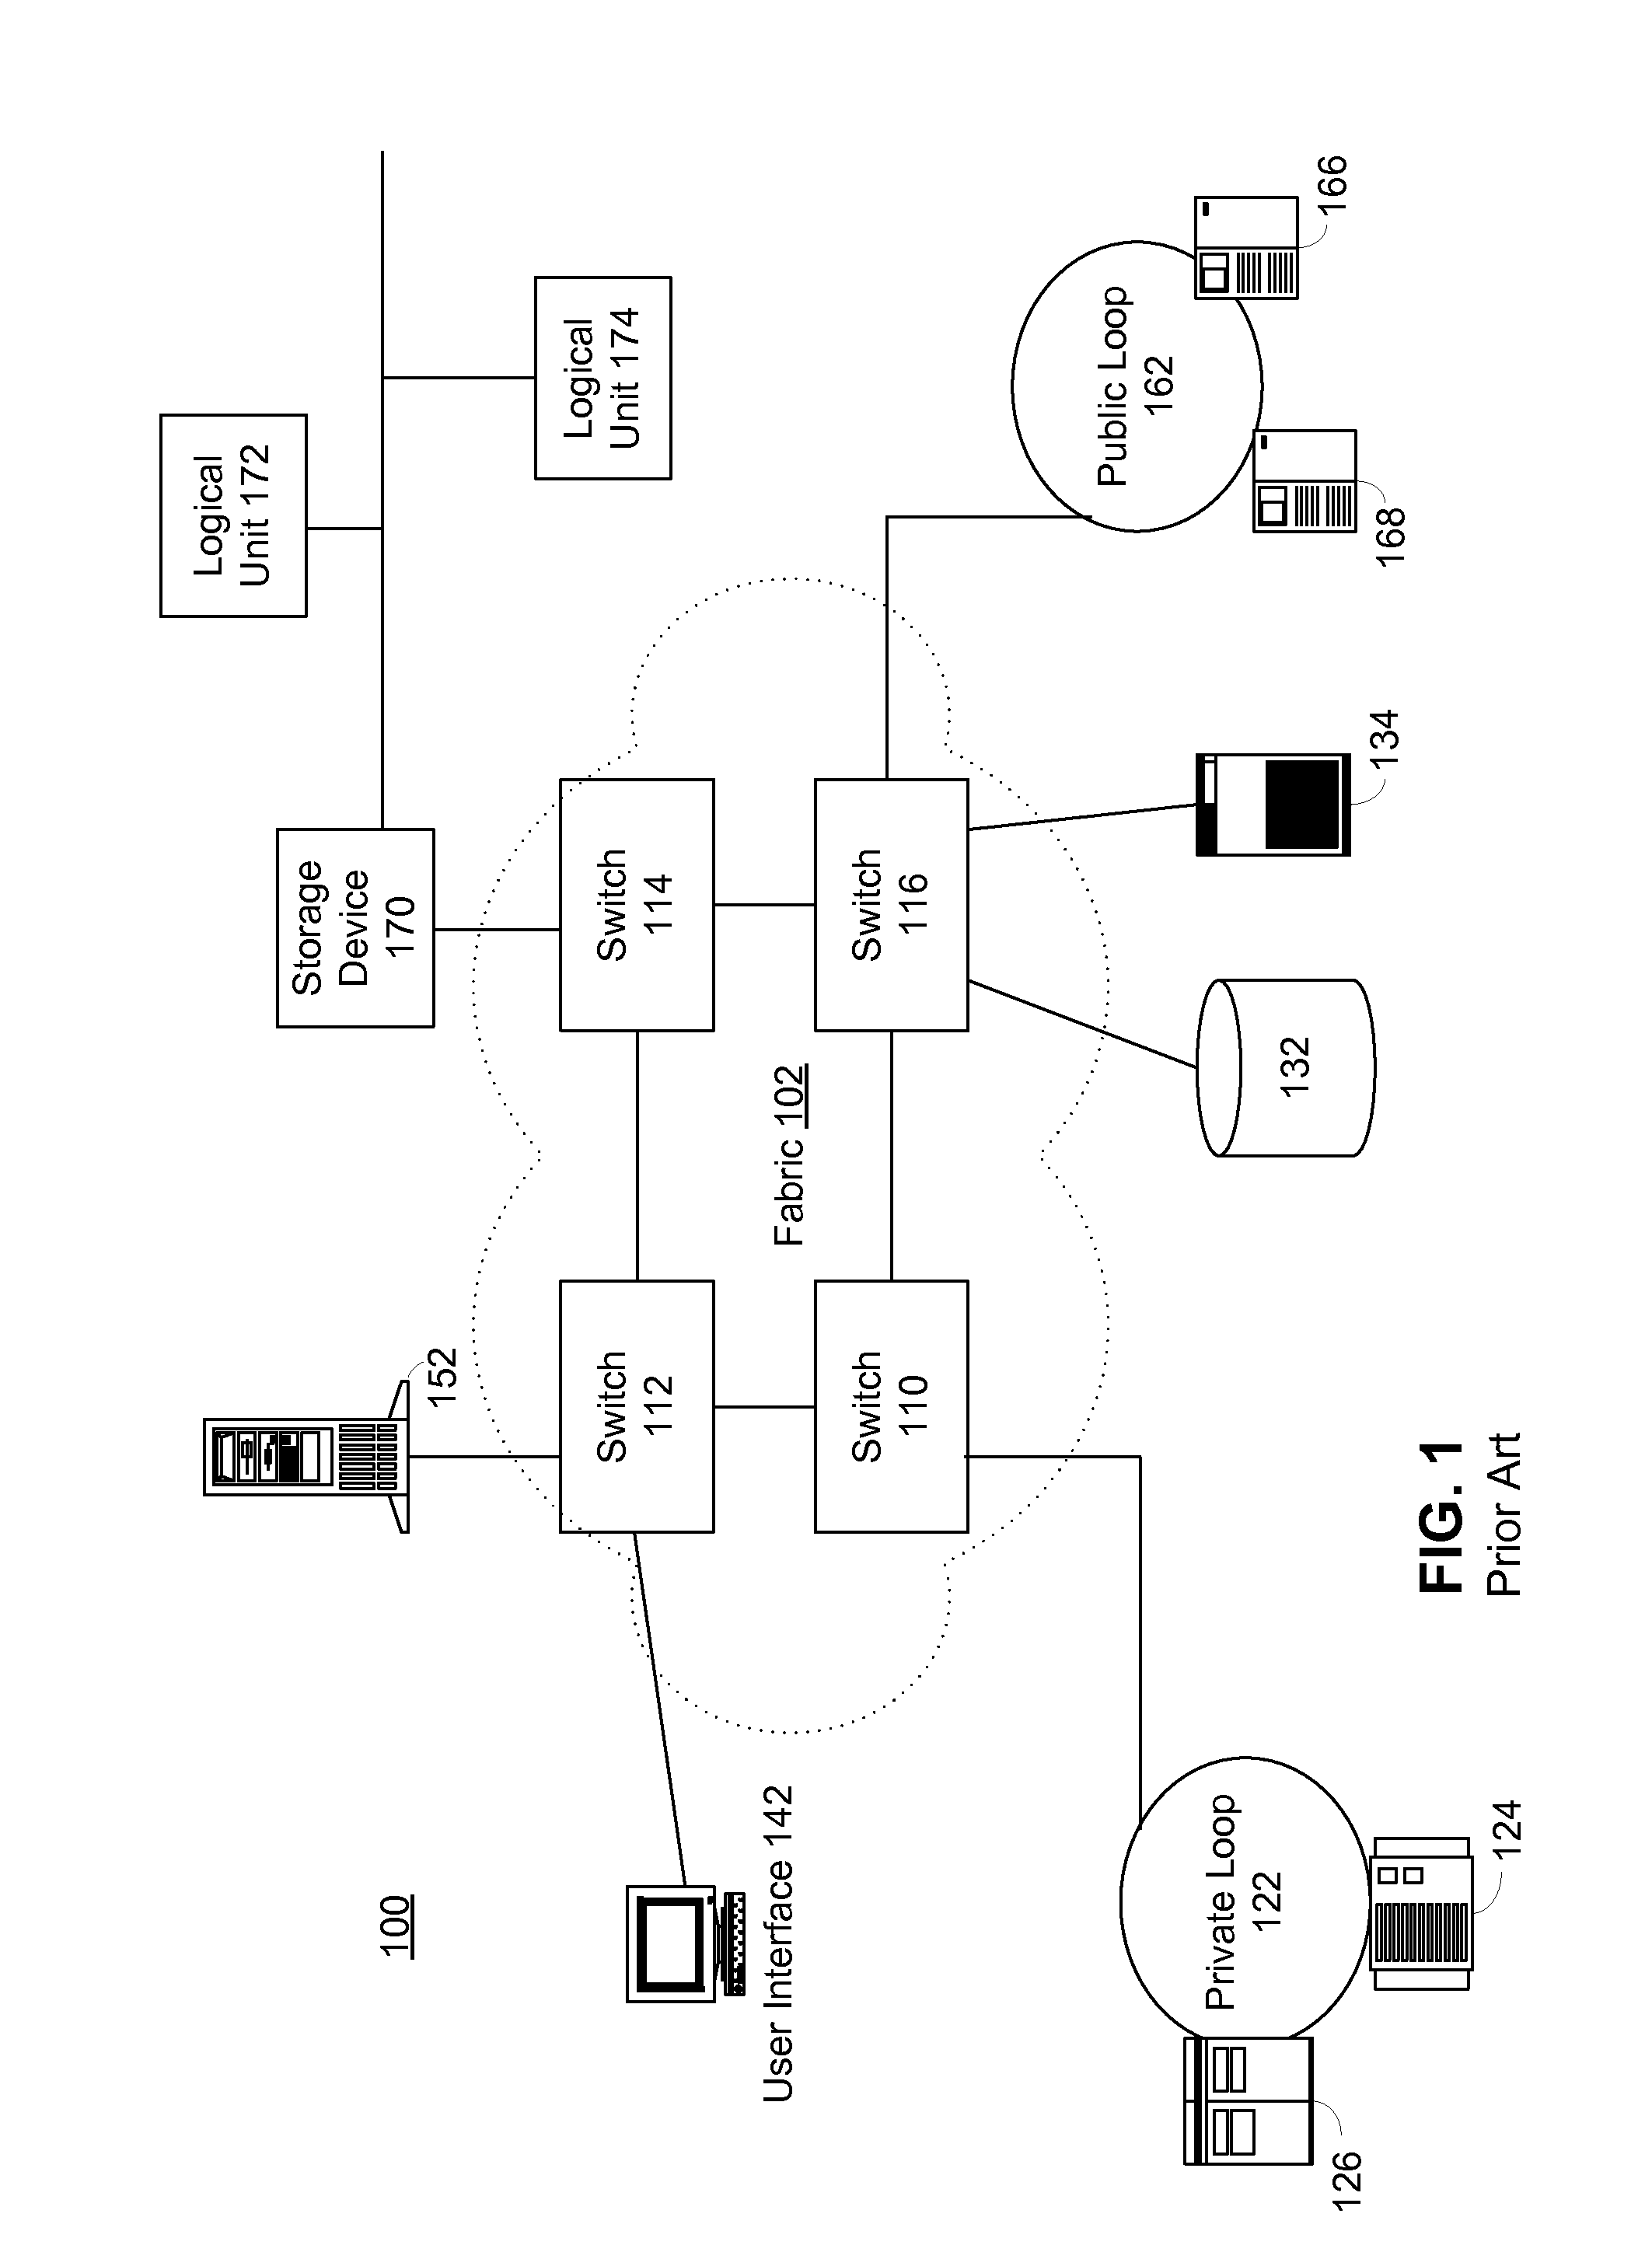 Method and apparatus for providing virtual ports with attached virtual devices in a storage area network